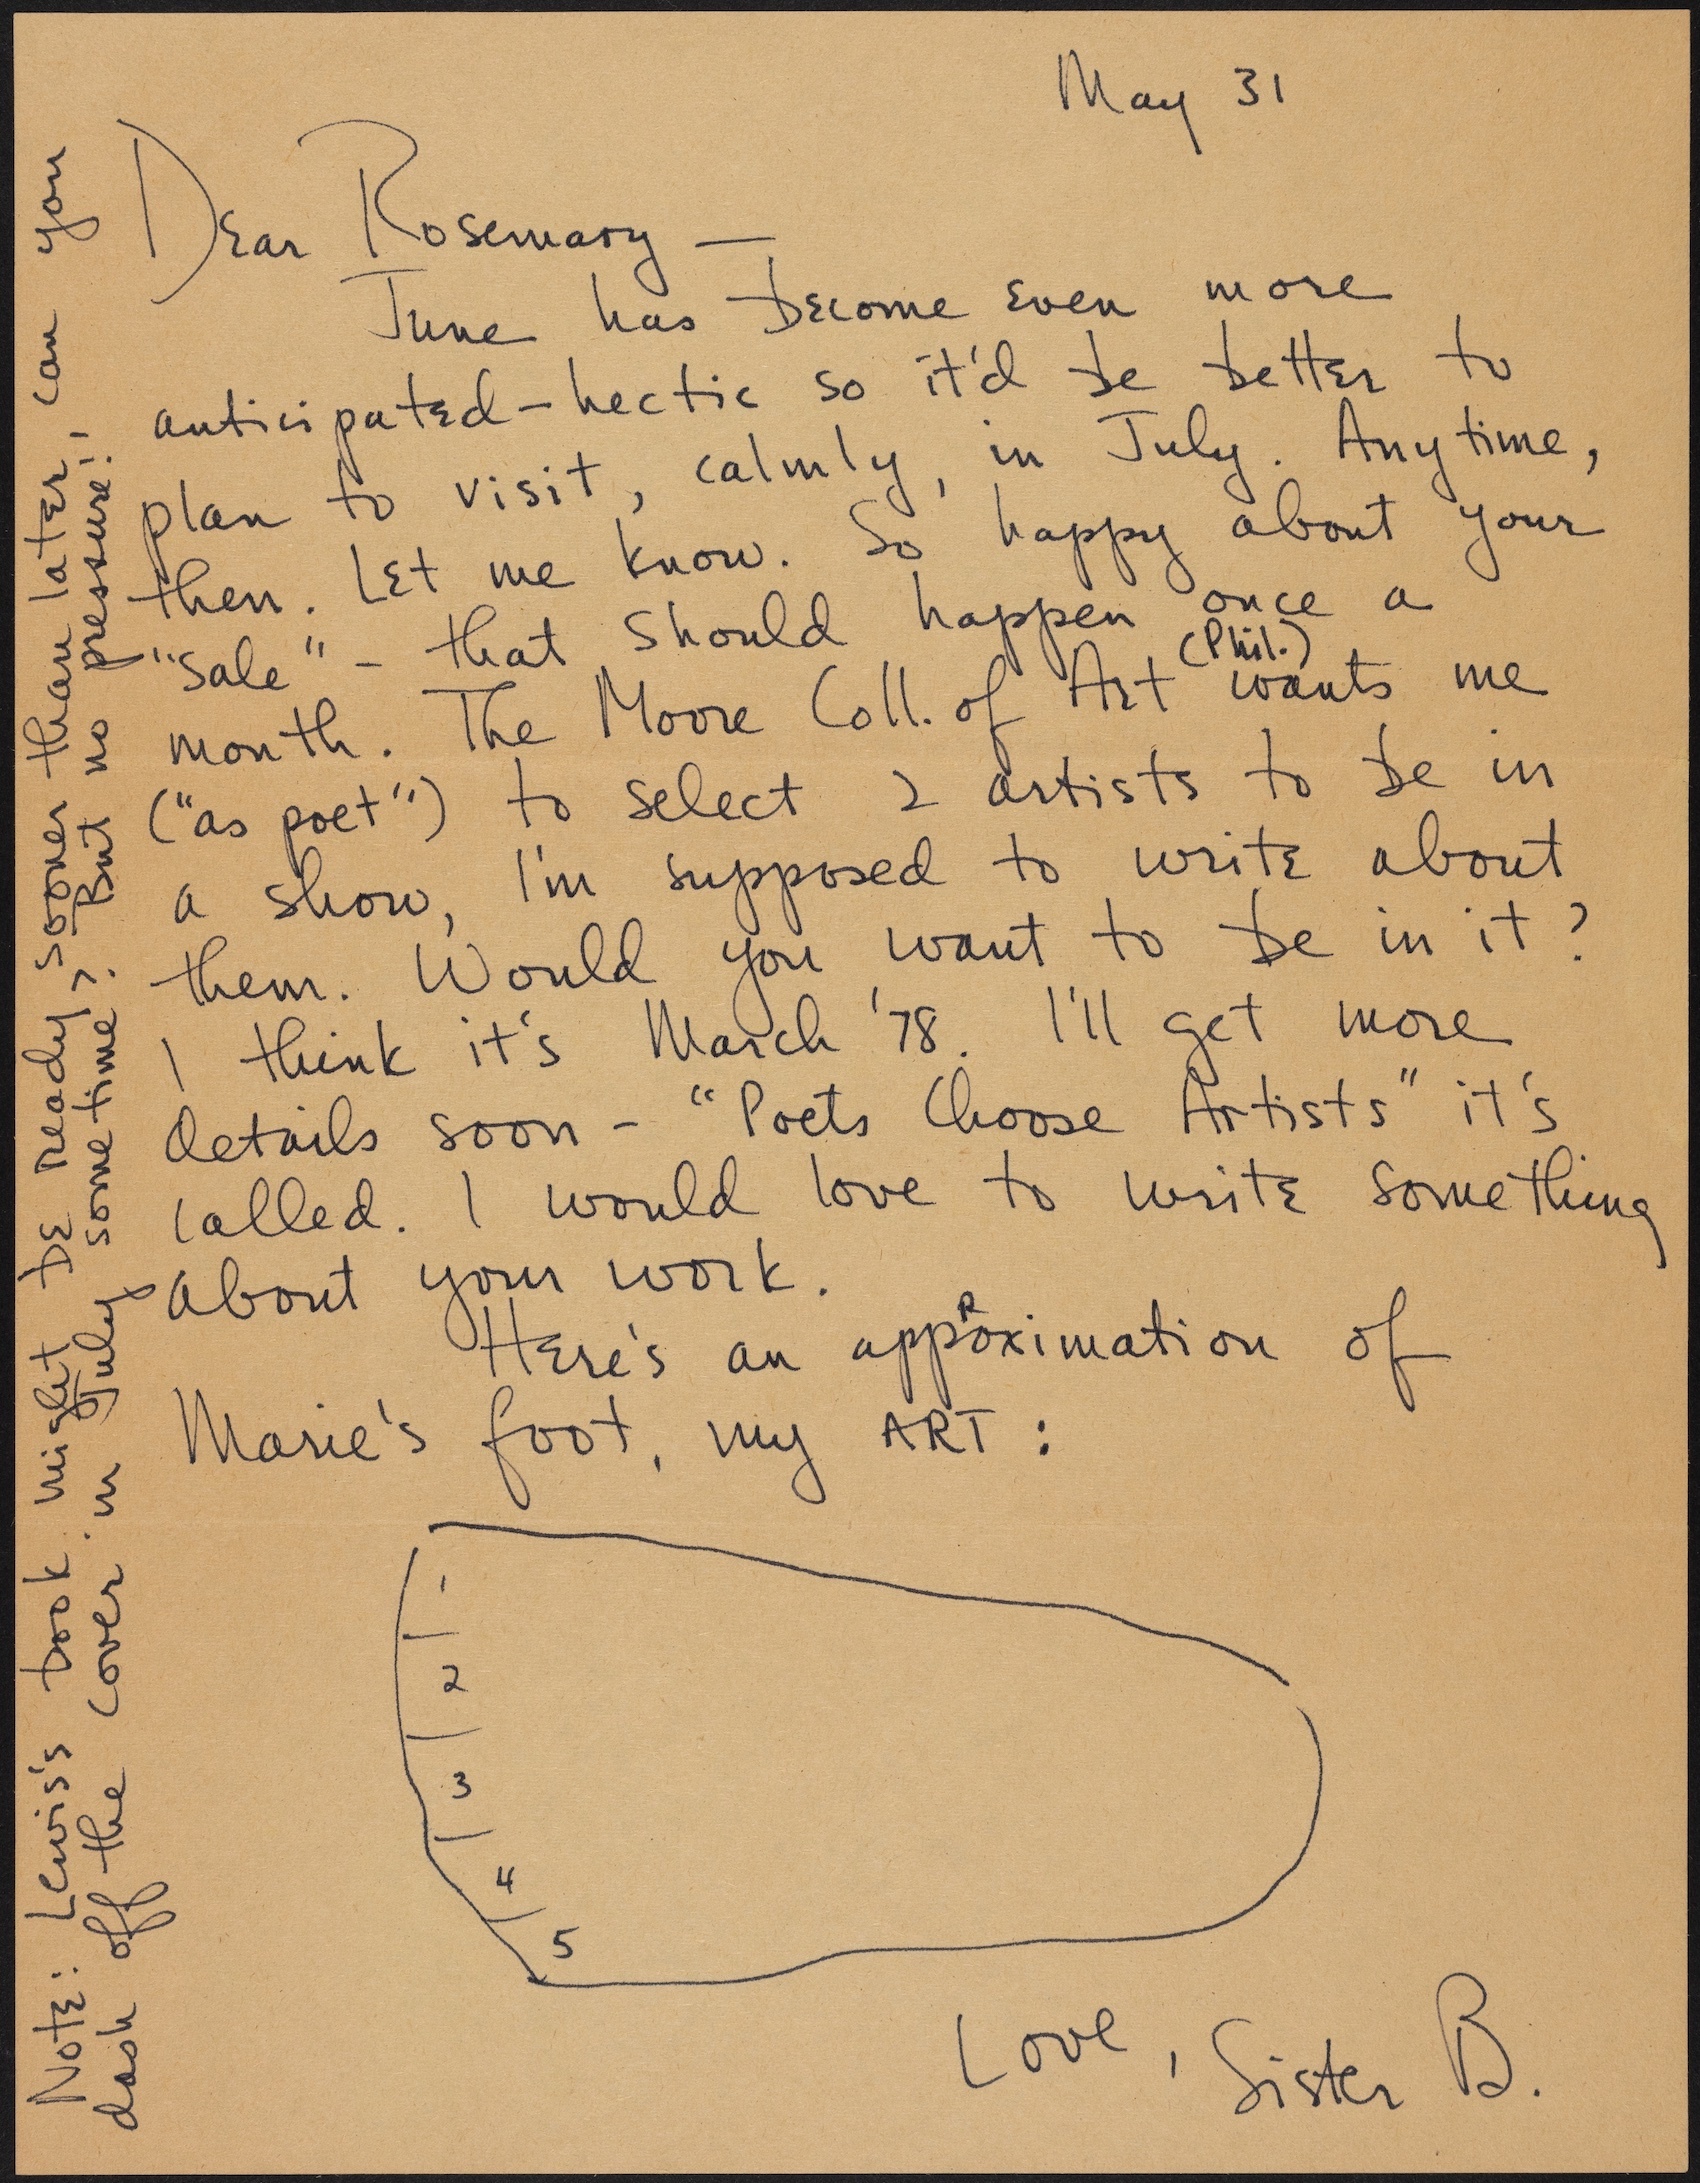 Letter from Bernadette to Rosemary, May 31, 1977